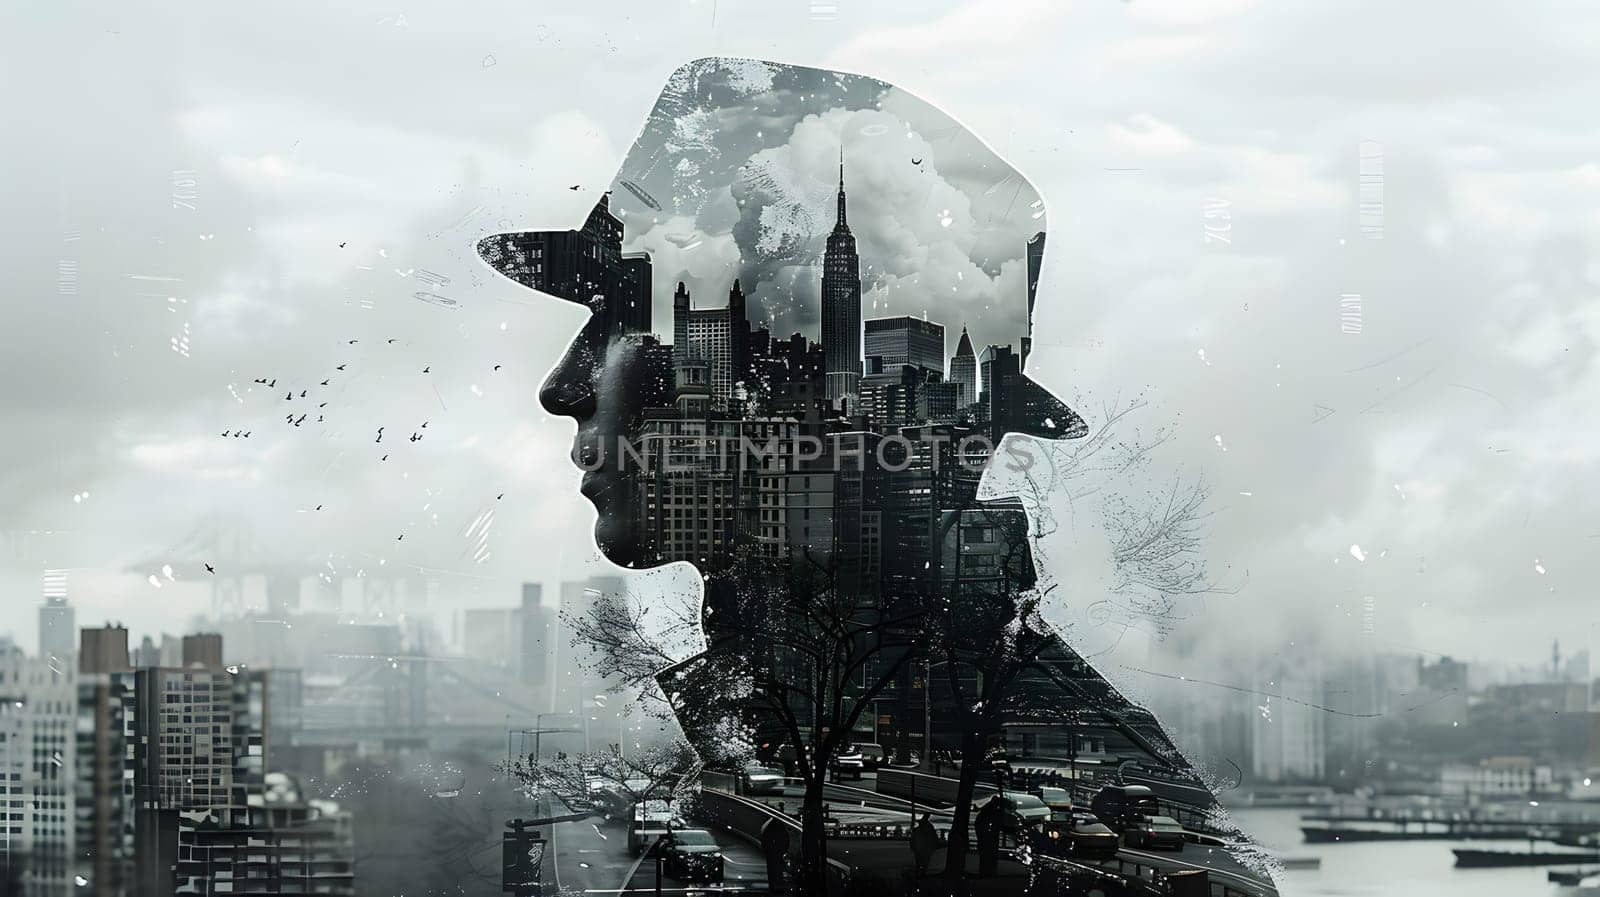 A double exposure art piece featuring a man in a hat combined with a city skyline in the background. The sky is filled with clouds and pollution, showcasing the urban design of the buildings